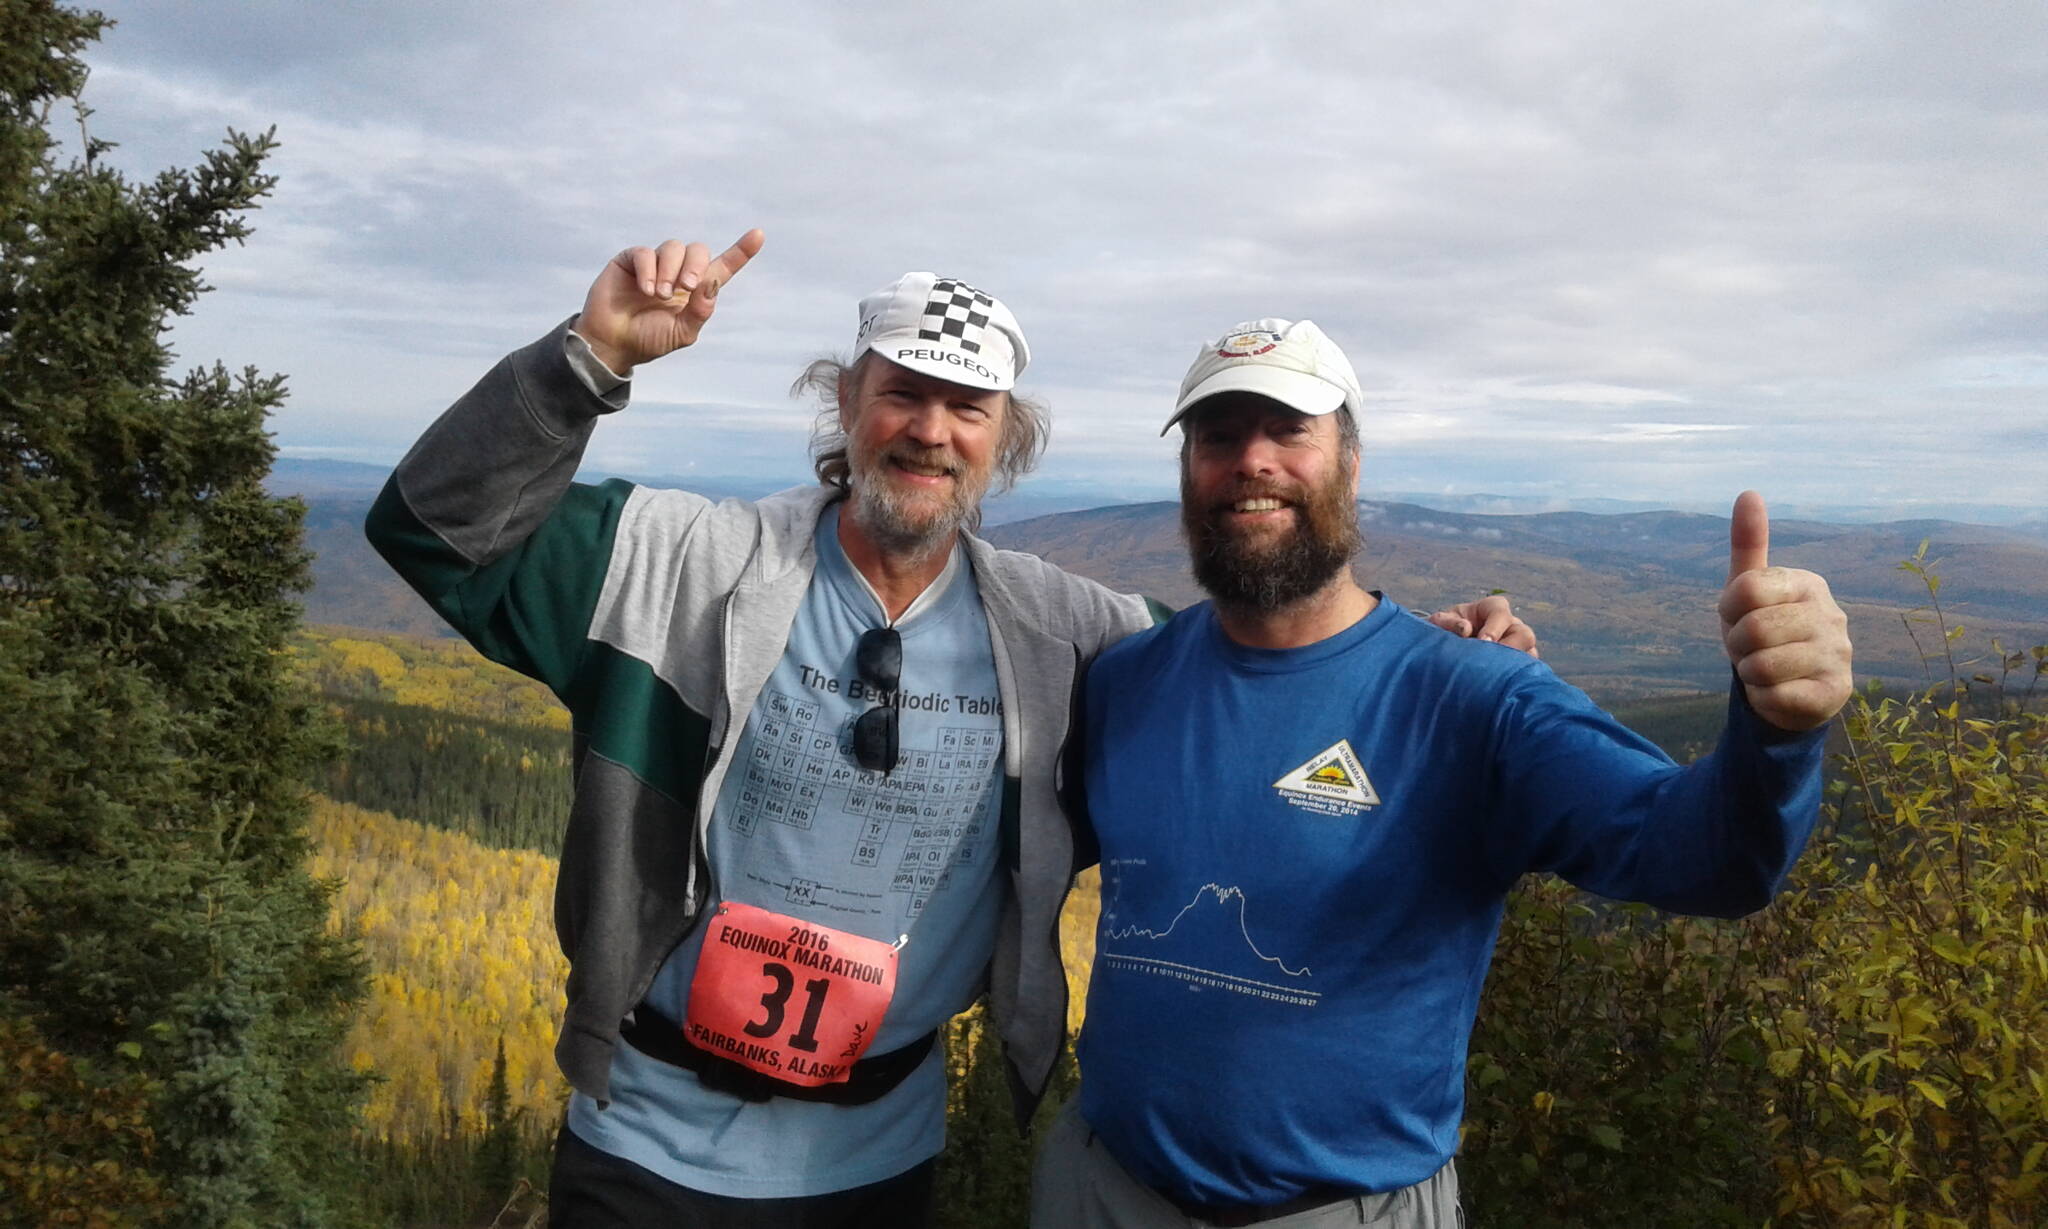 Dave Covey and Jim Brader on the course of the Equinox Marathon in 2016. (Courtesy Photo / Jim Brader)